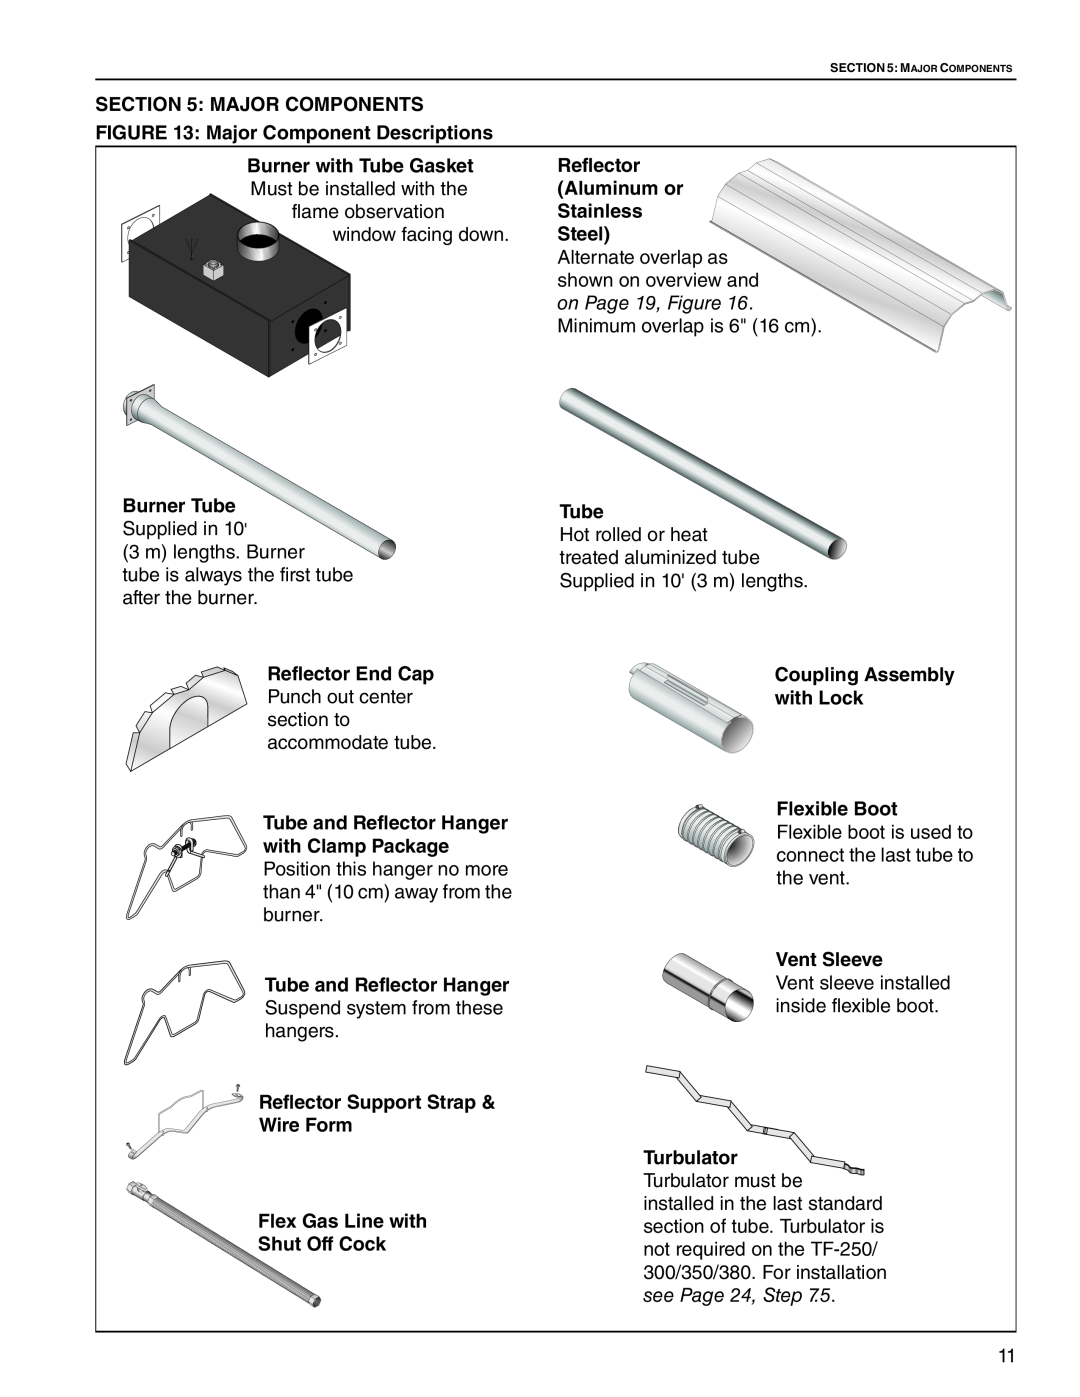 Roberts Gorden TF-200 Major Components, Major Component Descriptions, Reflector, Aluminum or, Stainless, Steel, Tube 